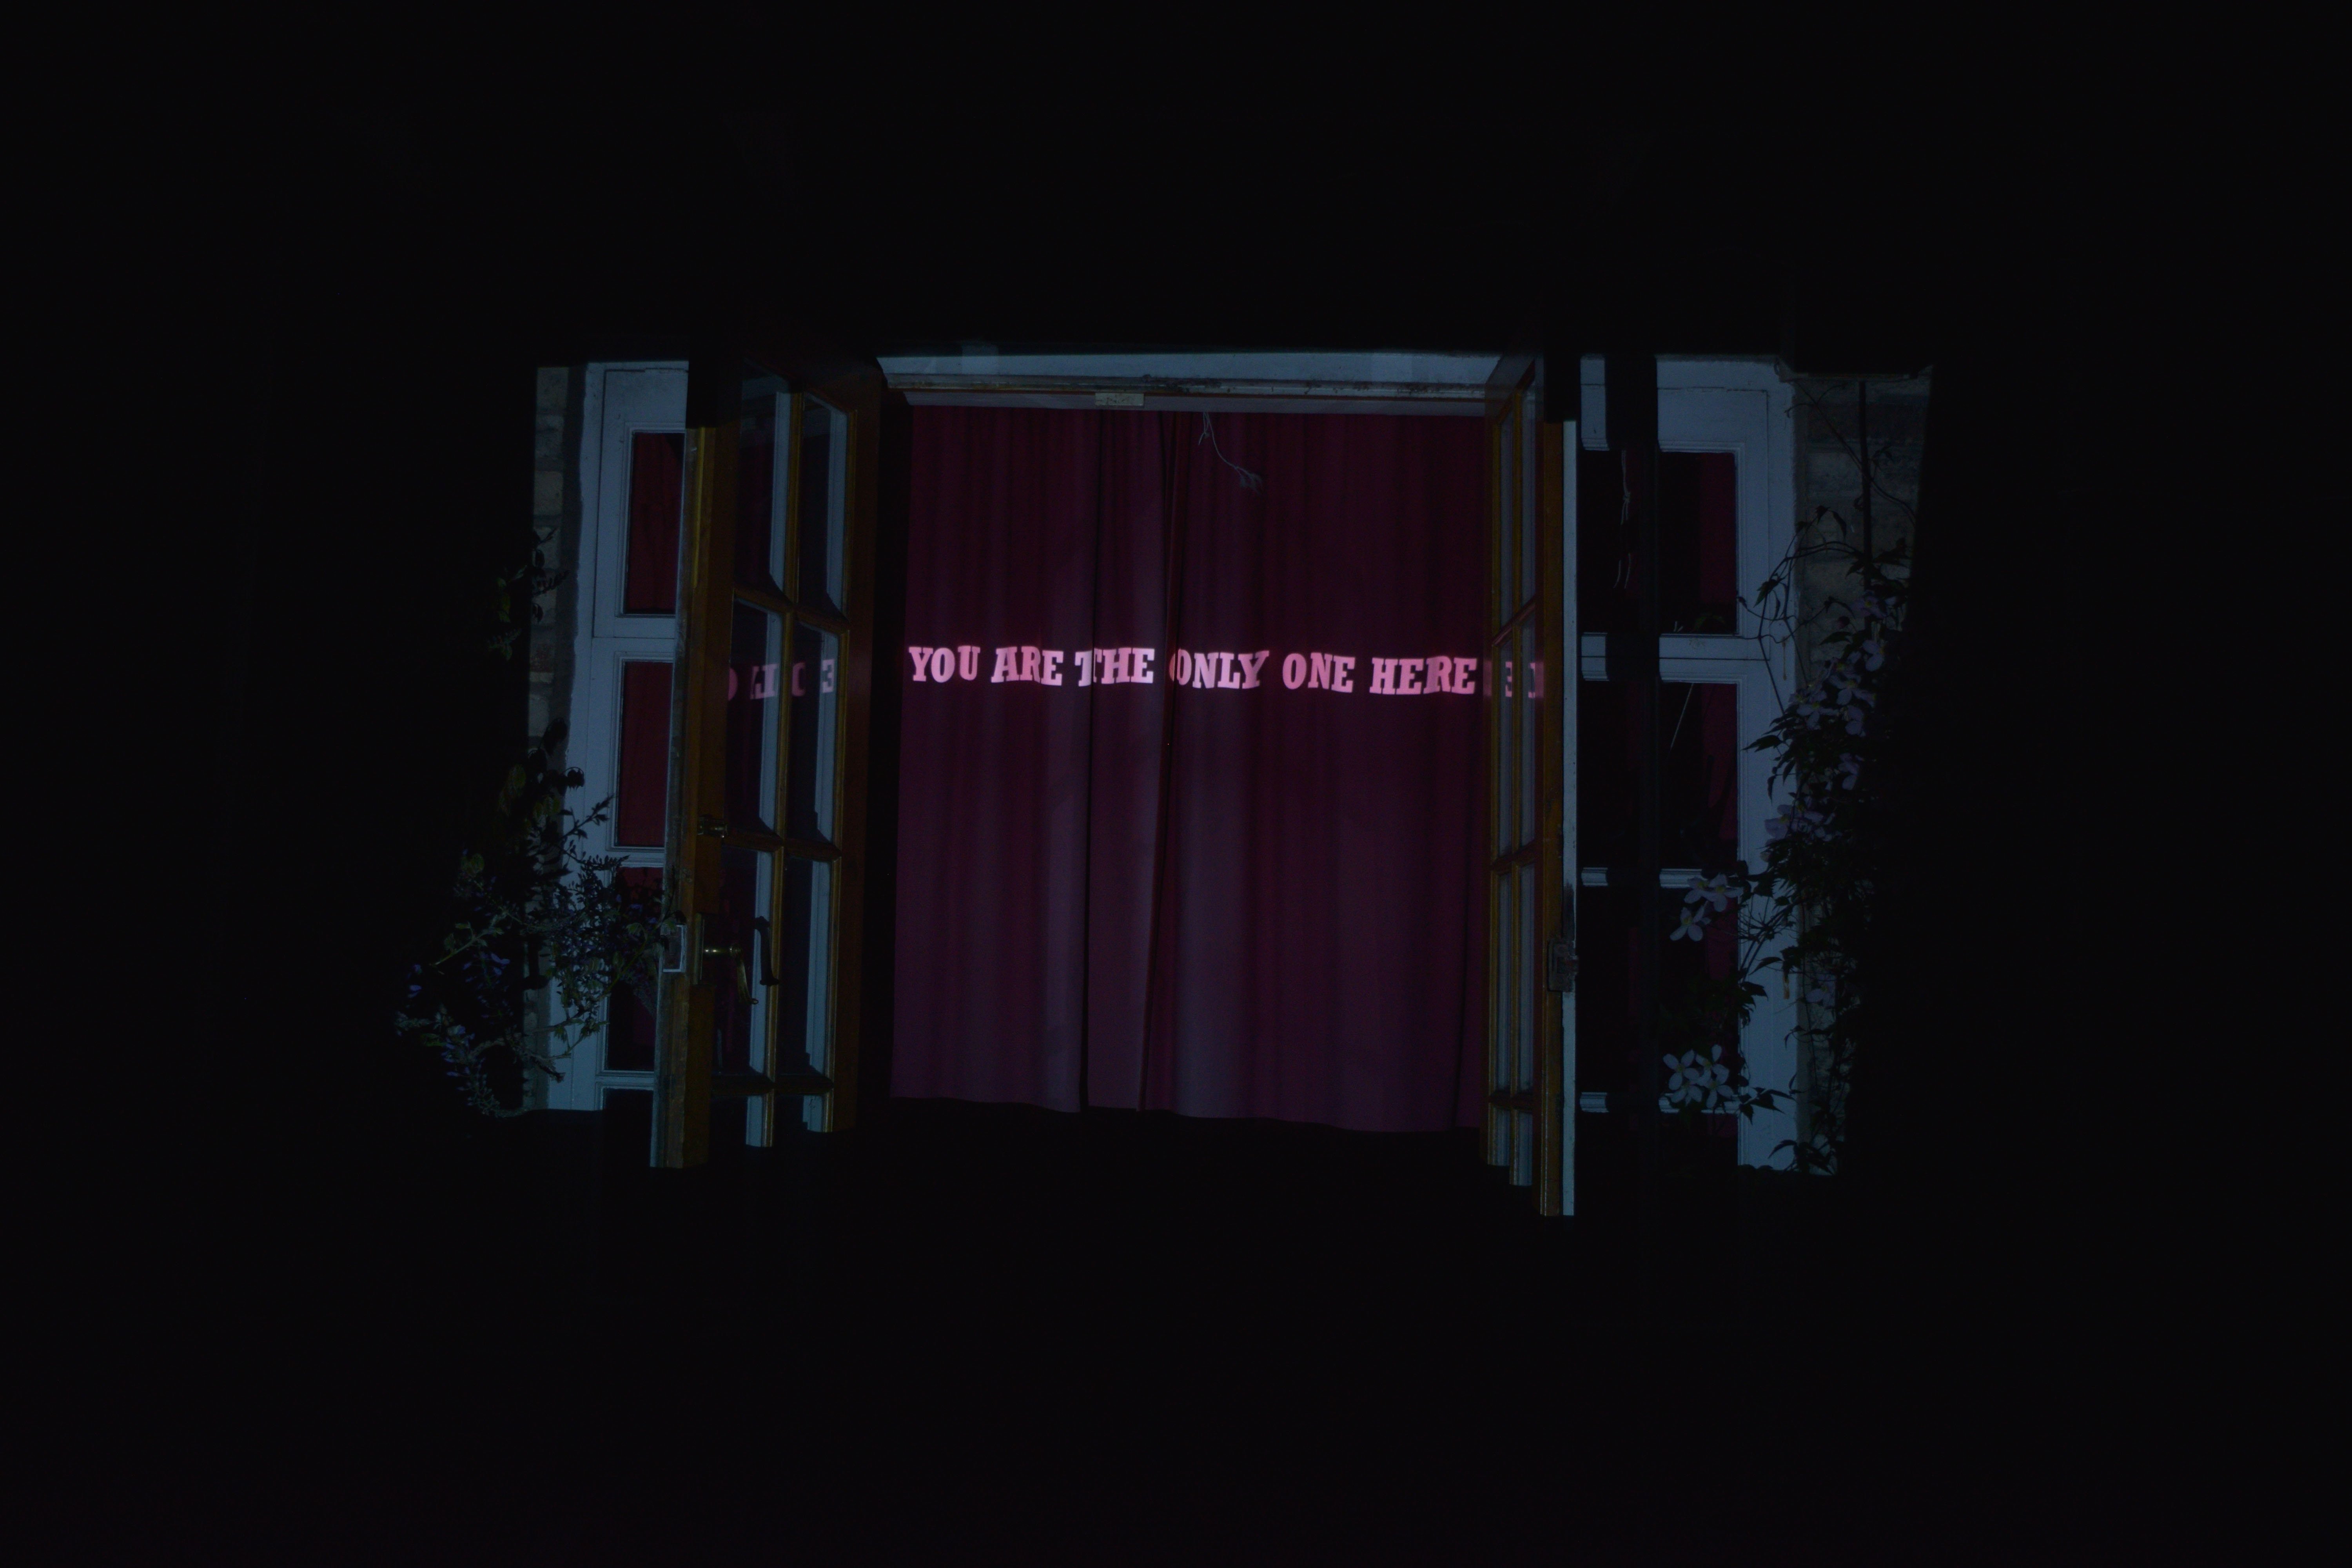 French Doors are open to the garden and the words You are the only one here are projected onto red curtains. These are from google hang outs before anyone joins a meeting. The scene is lit to suggest a filmic aesthetic. Beyond the illuminated area is pitch black, it is night. The open doors look as if the bottom half is submerged in a black pool of water.